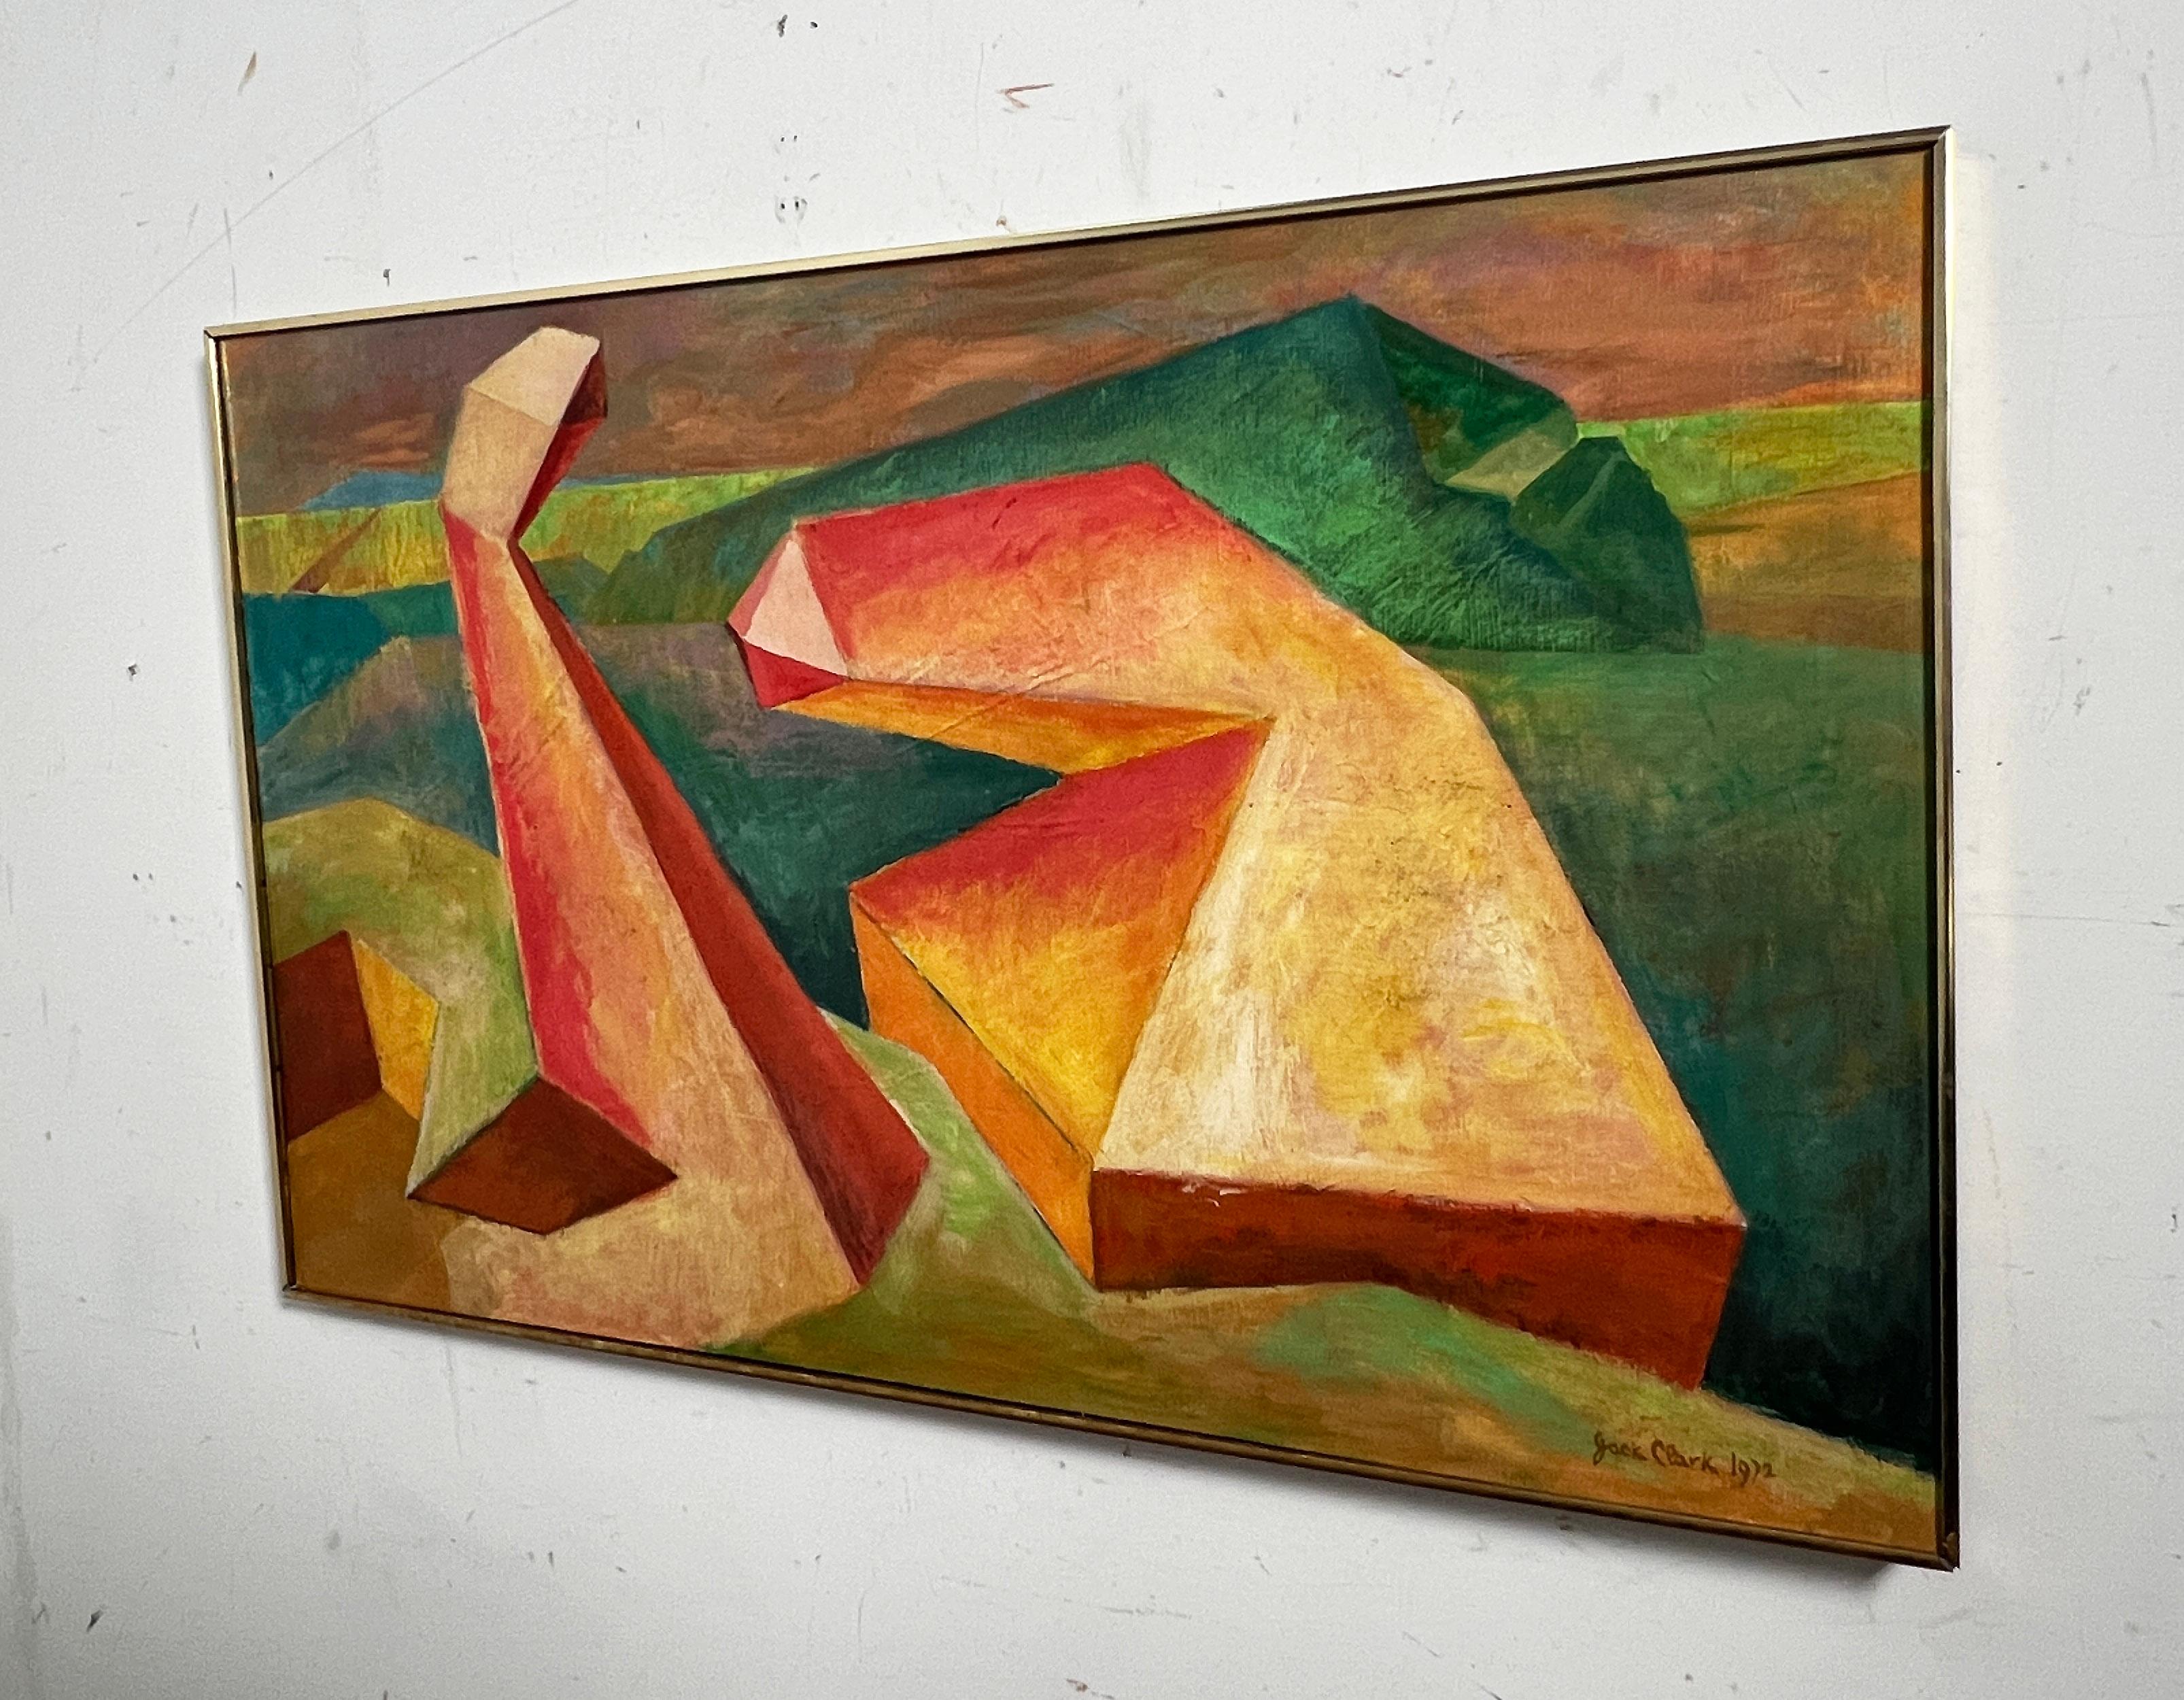 Large Cubist Landscape Abstract Painting Signed Jack Clark, d. 1972 In Good Condition For Sale In Peabody, MA